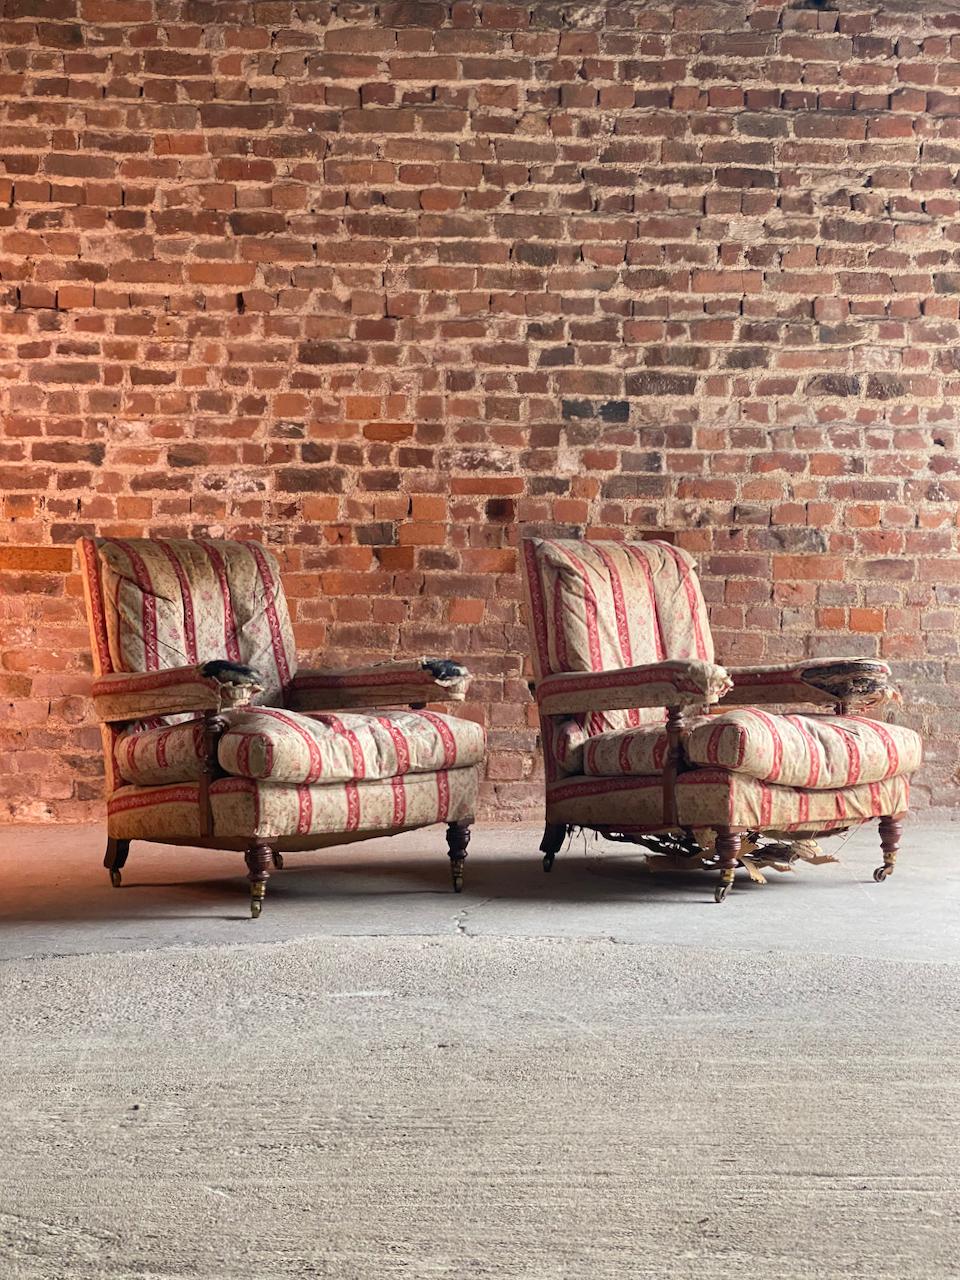 Magnificent pair of Howard and Sons open armchairs 19th century England circa 1850

A magnificent pair of rare 19th century English Country House Howard and Sons ‘Open Arm’ mahogany armchairs dating to England circa 1850, these elegant and